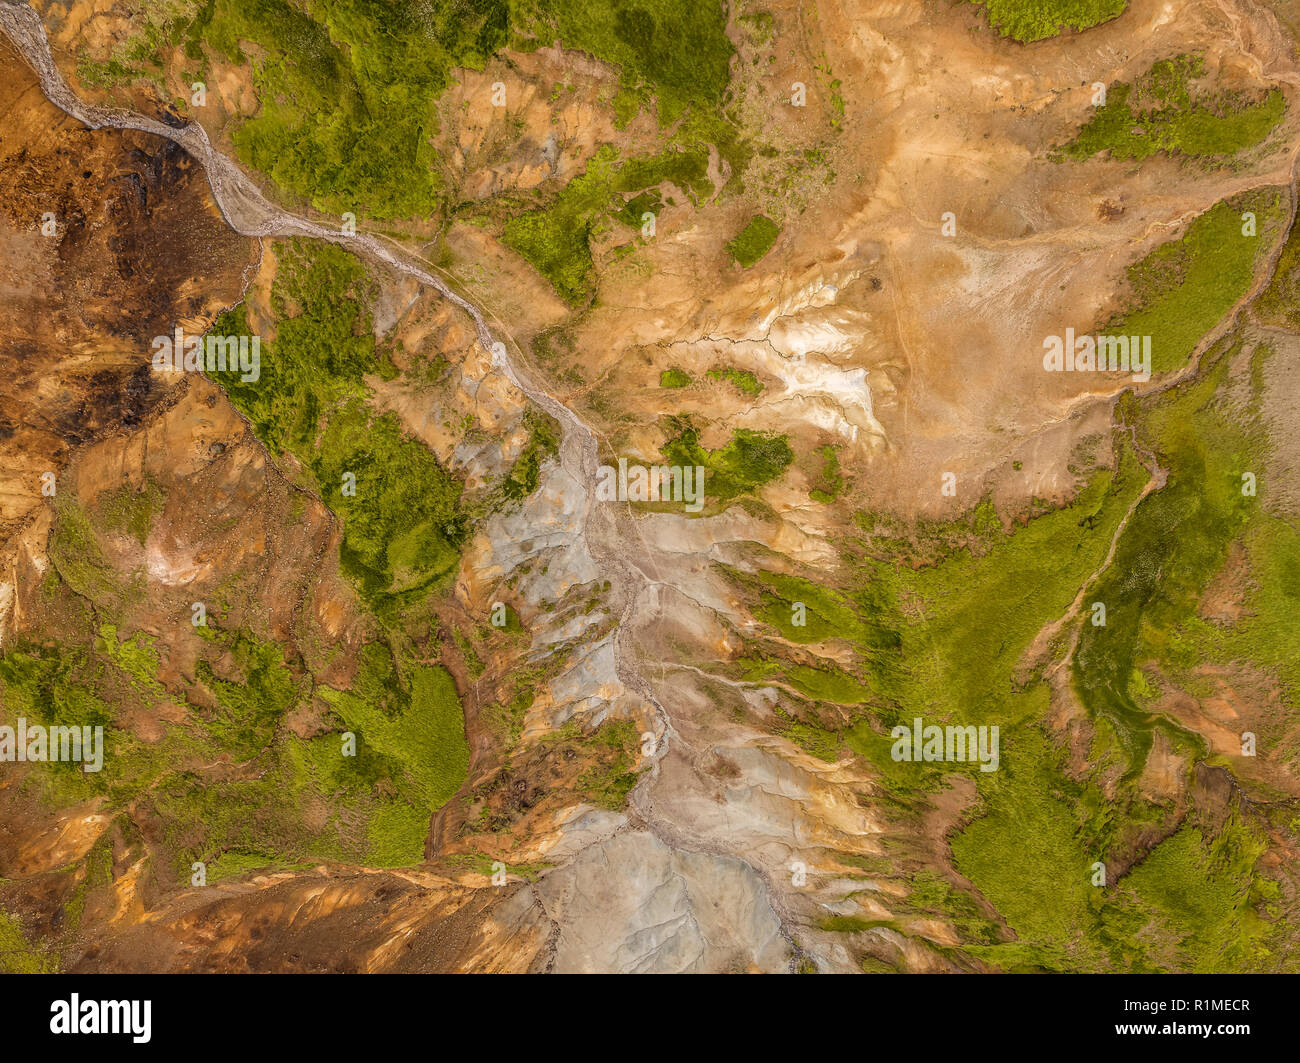 Geothermal Hot Spring Area, Reykjanes Peninsula, Iceland.  This image is shot using a drone. Stock Photo